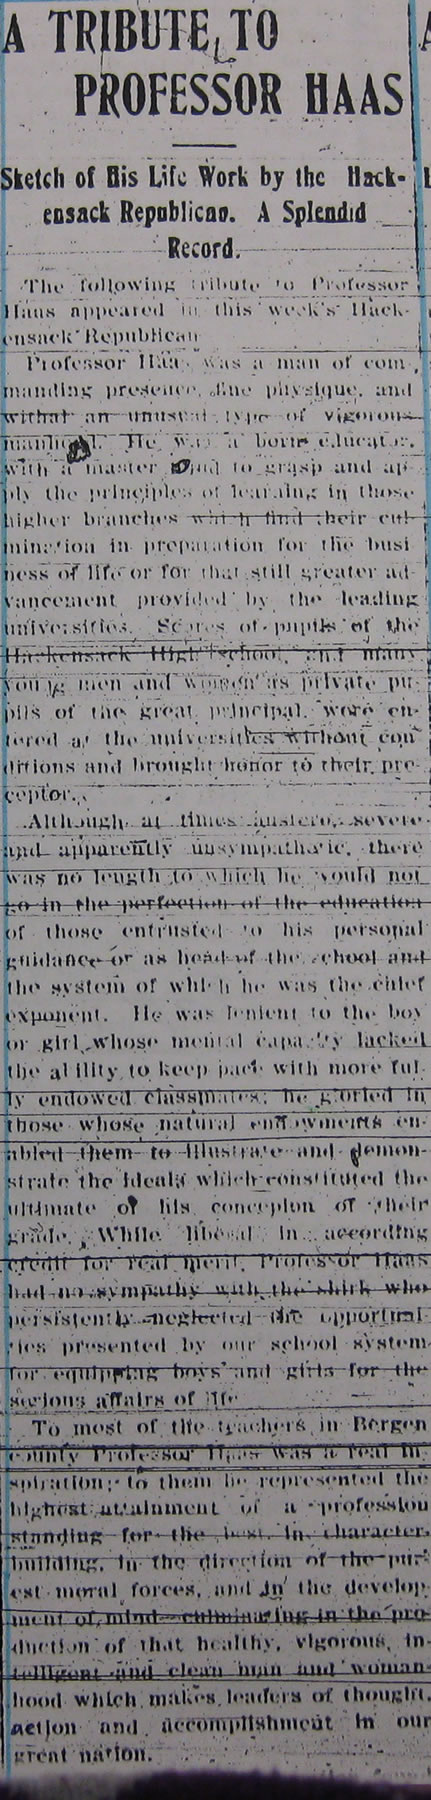 1 Bergen County Record January 6, 1906 Tribute1